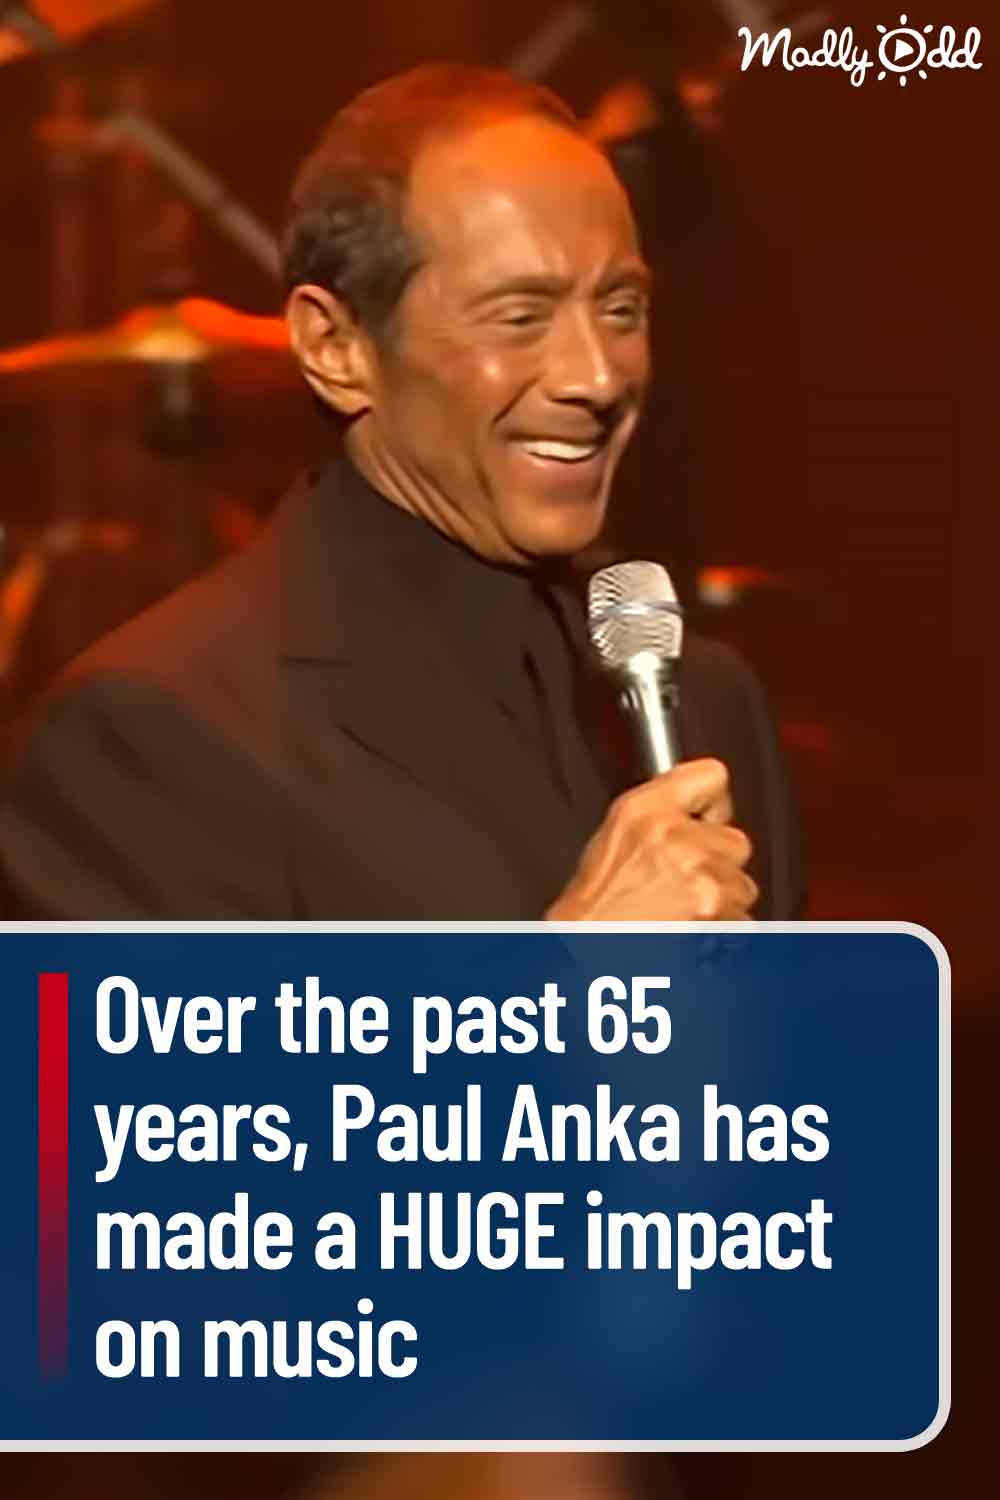 Over the past 65 years, Paul Anka has made a HUGE impact on music